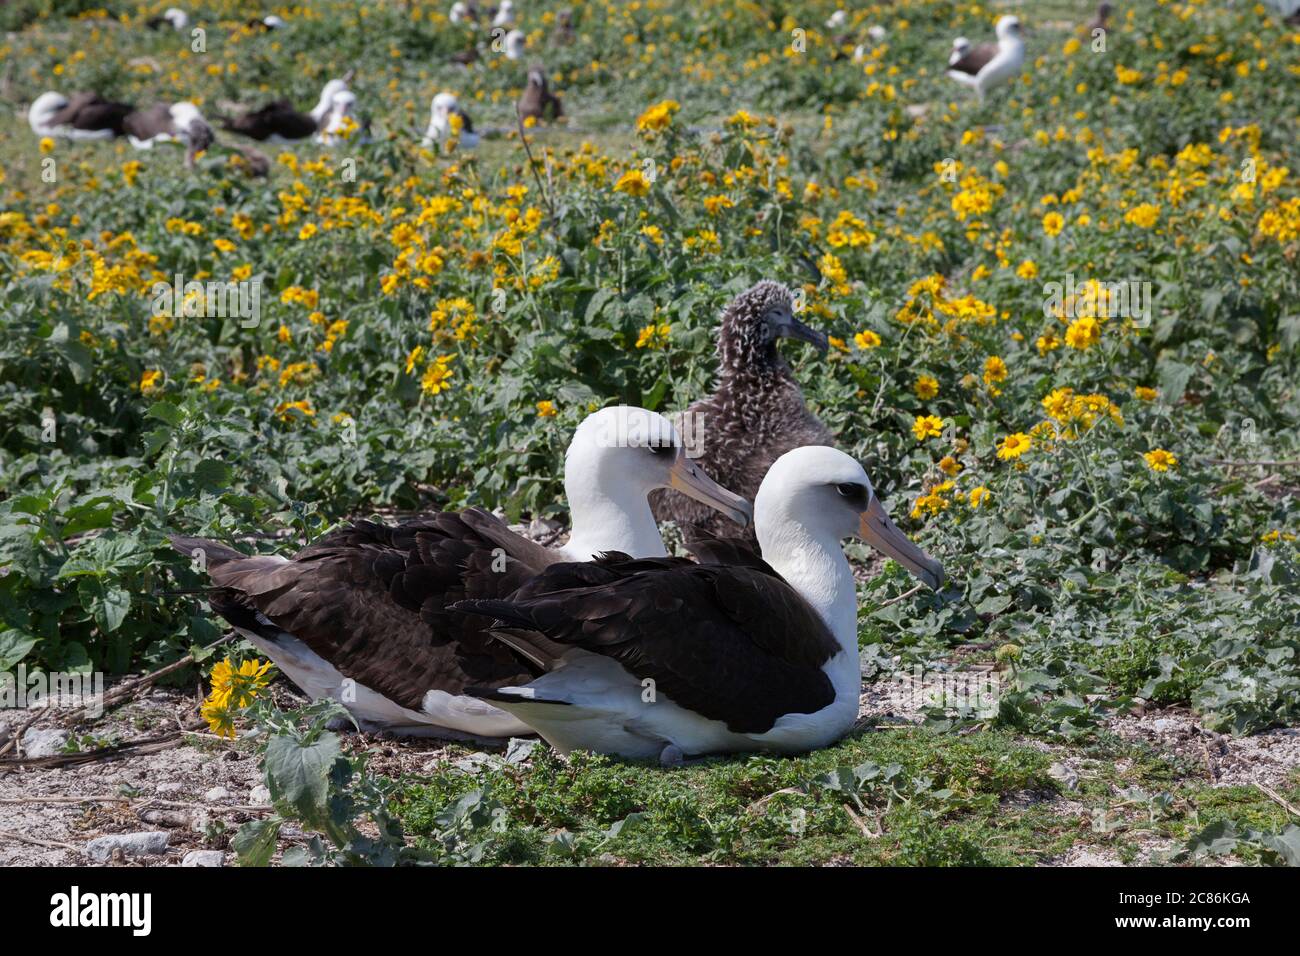 Laysan albatrosses, Phoebastria immutabilis, with check, in field of invasive weeds, Sand Island, Midway Atoll National Wildlife Refuge, USA Stock Photo